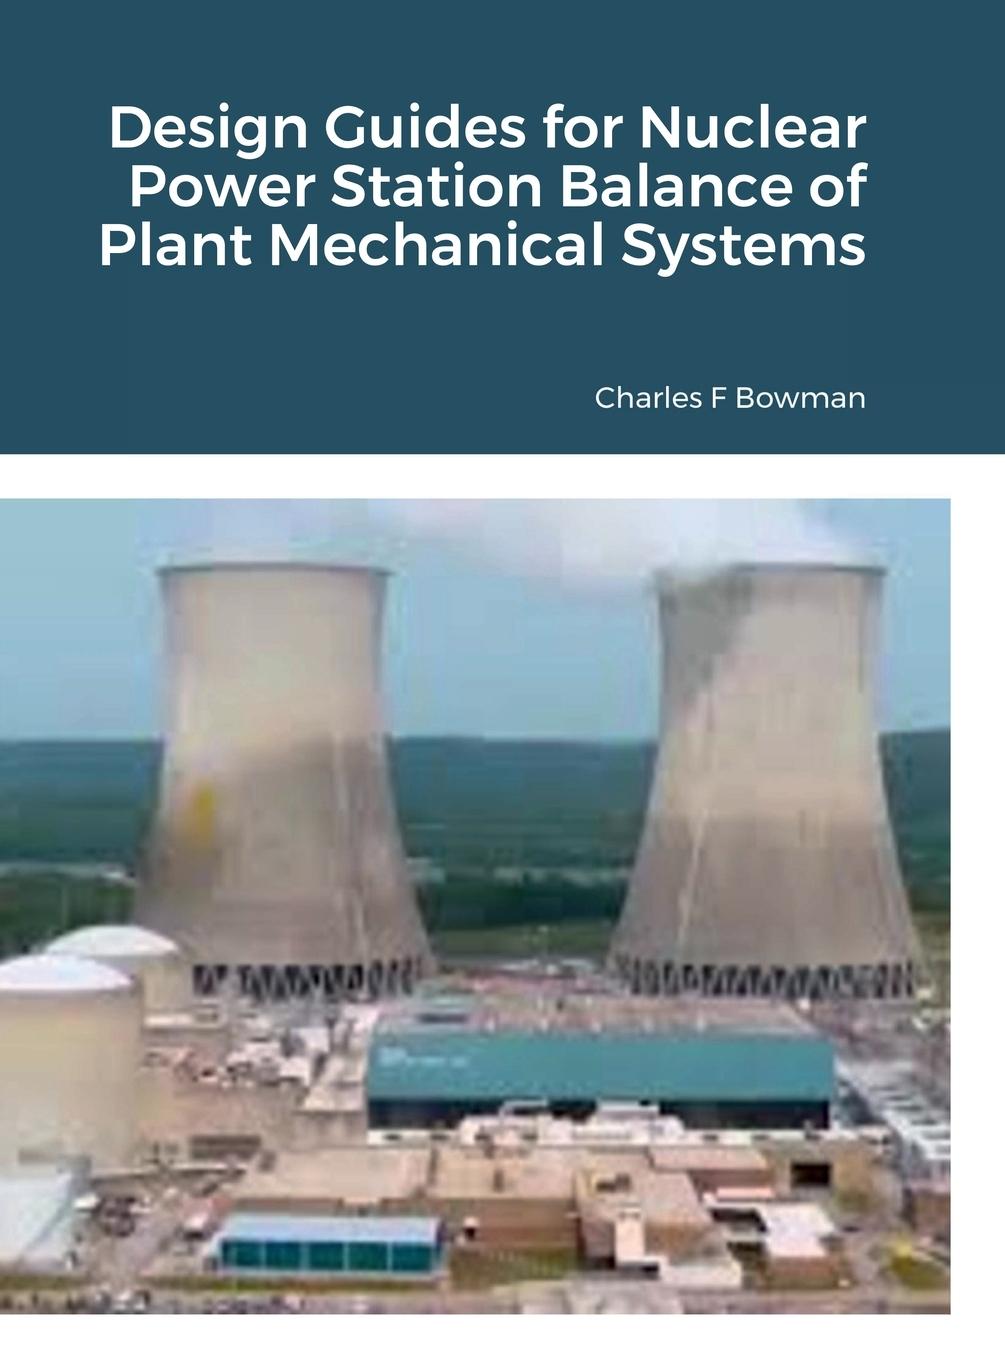 Knjiga Design Guides for Nuclear Power Station Balance of Plant Mechanical Systems 